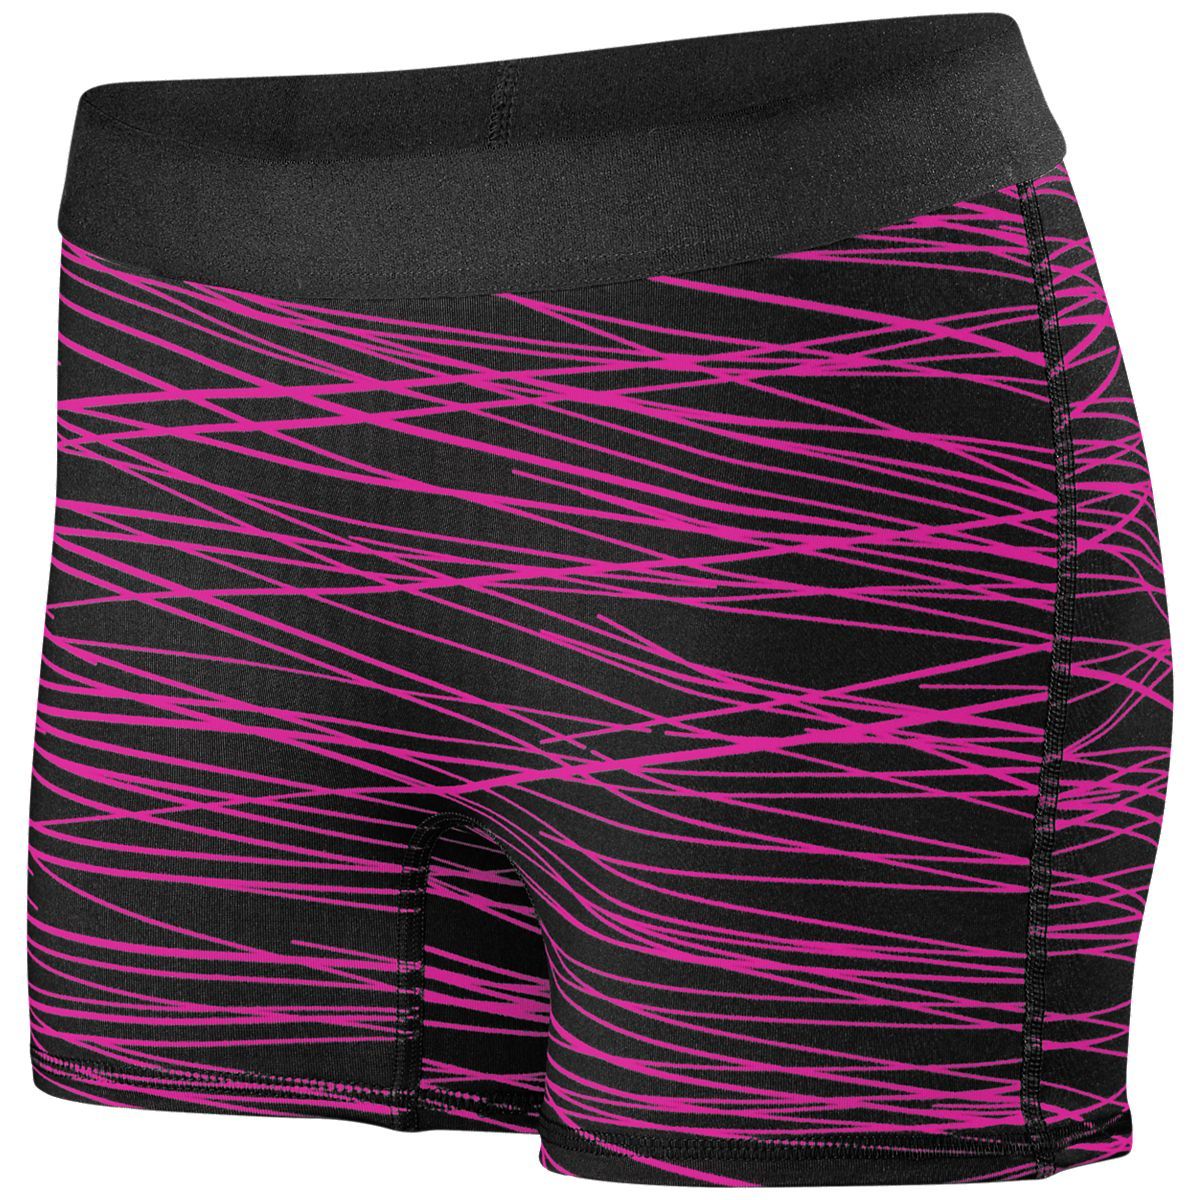 Augusta Sportswear Ladies Hyperform Fitted Shorts in Black/Pink Print  -Part of the Ladies, Ladies-Shorts, Augusta-Products product lines at KanaleyCreations.com